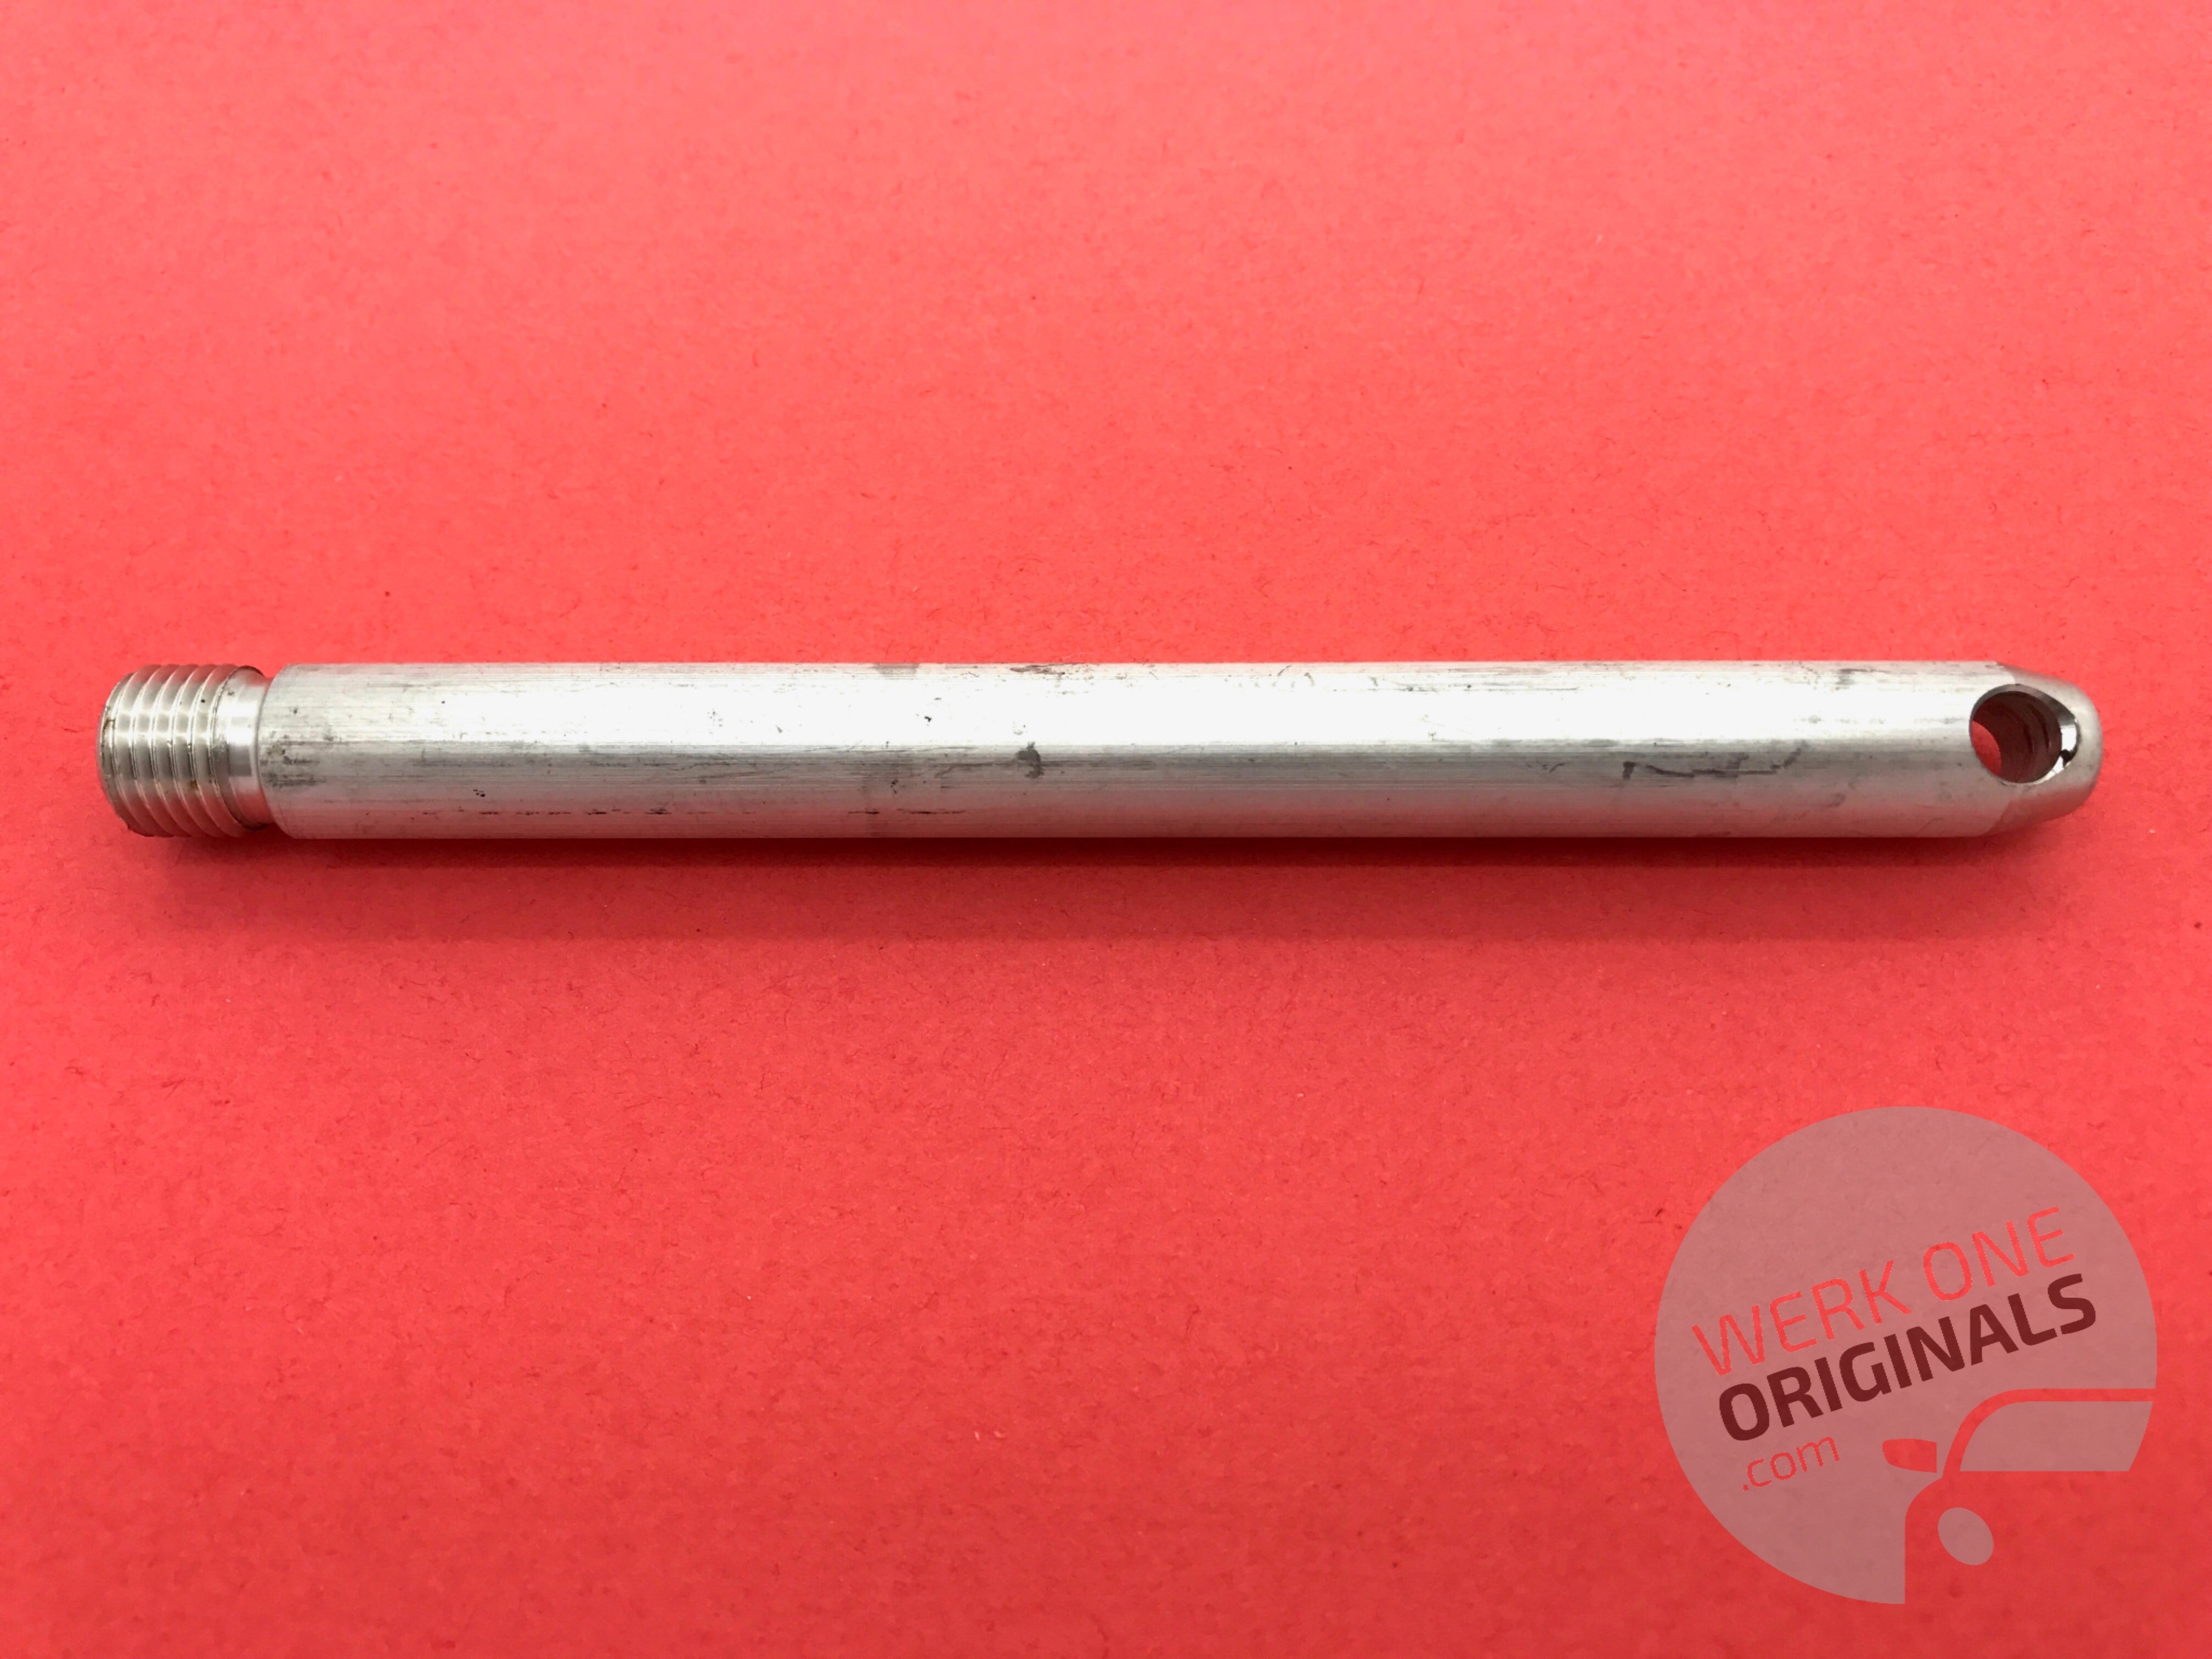 Porsche Official Wheel Removal Tool for Panamera Type 971 Models